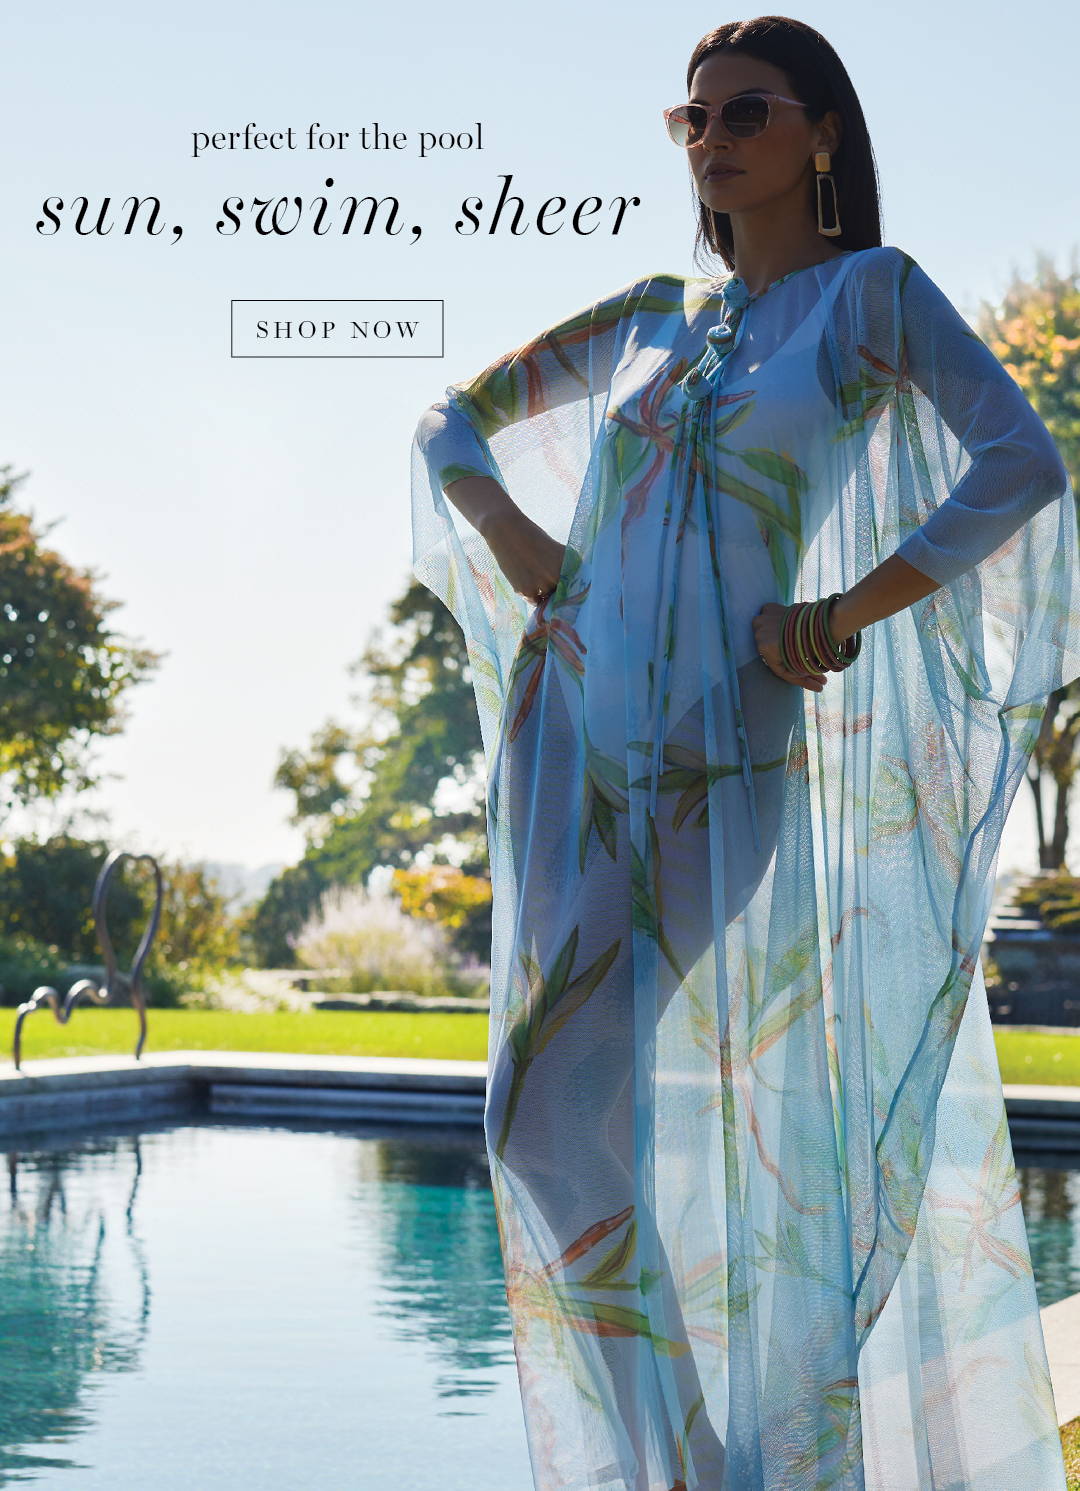 perfect for the pool | sun, swim, sheer | Woman wearing mesh kaftan cover up over a bathing suit by the pool for women's tropical clothing